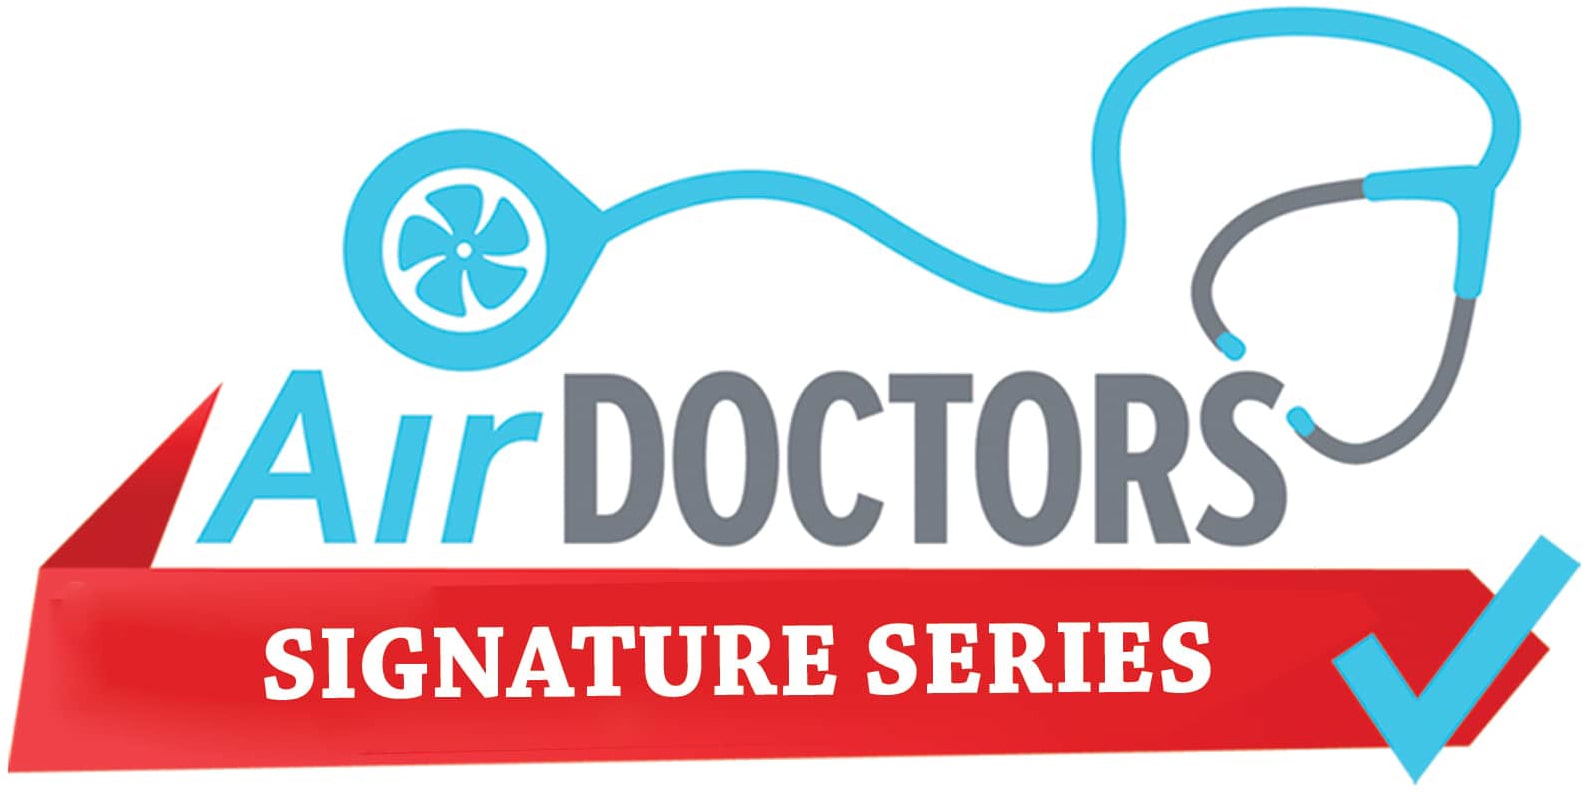 Check out Air Doctors signature series.